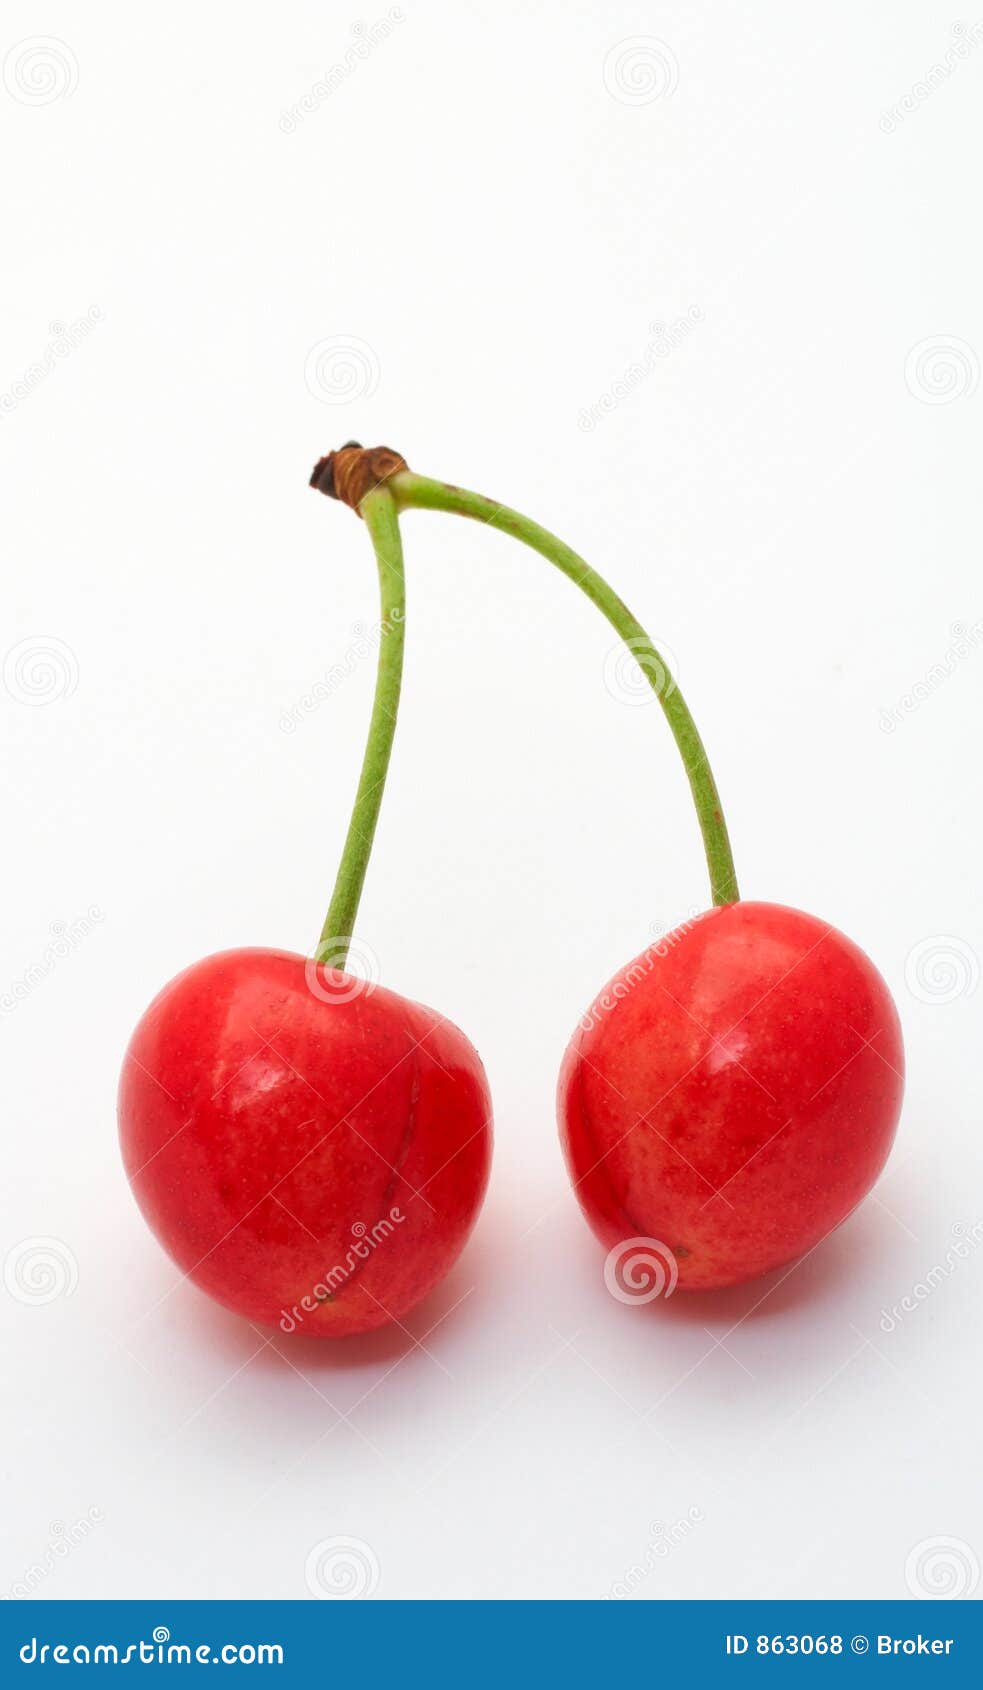 Two Cherries on White Background Stock Photo - Image of healthy, edible ...